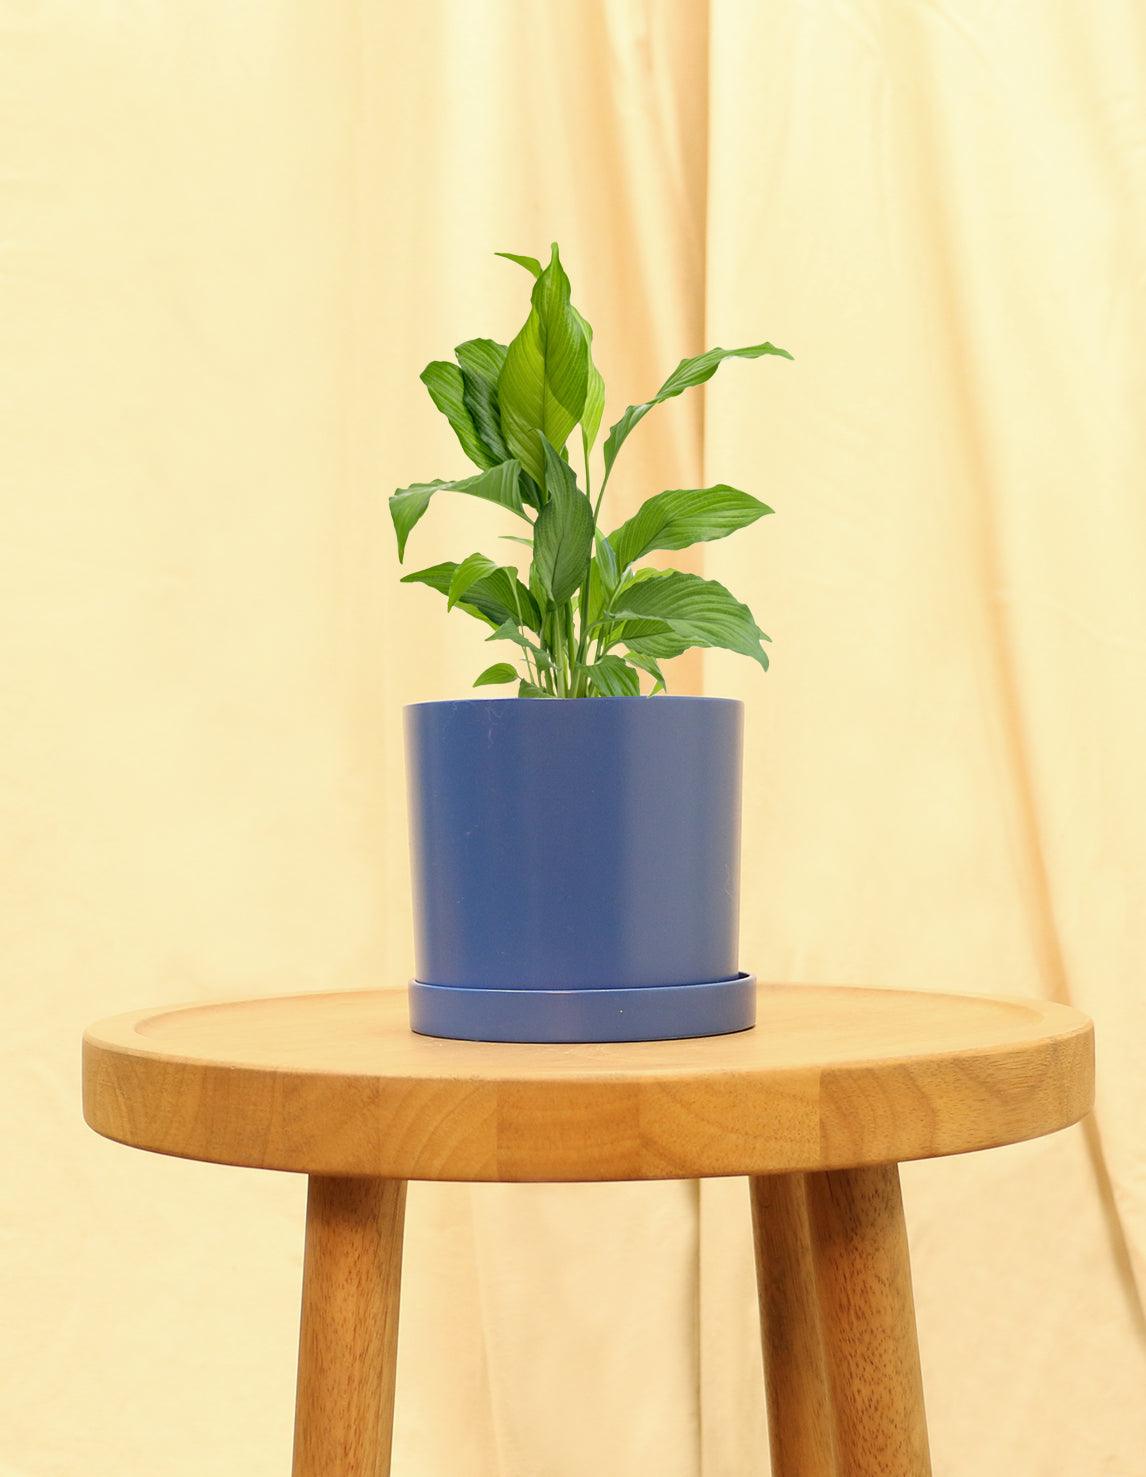 Small Peace Lily in blue pot.